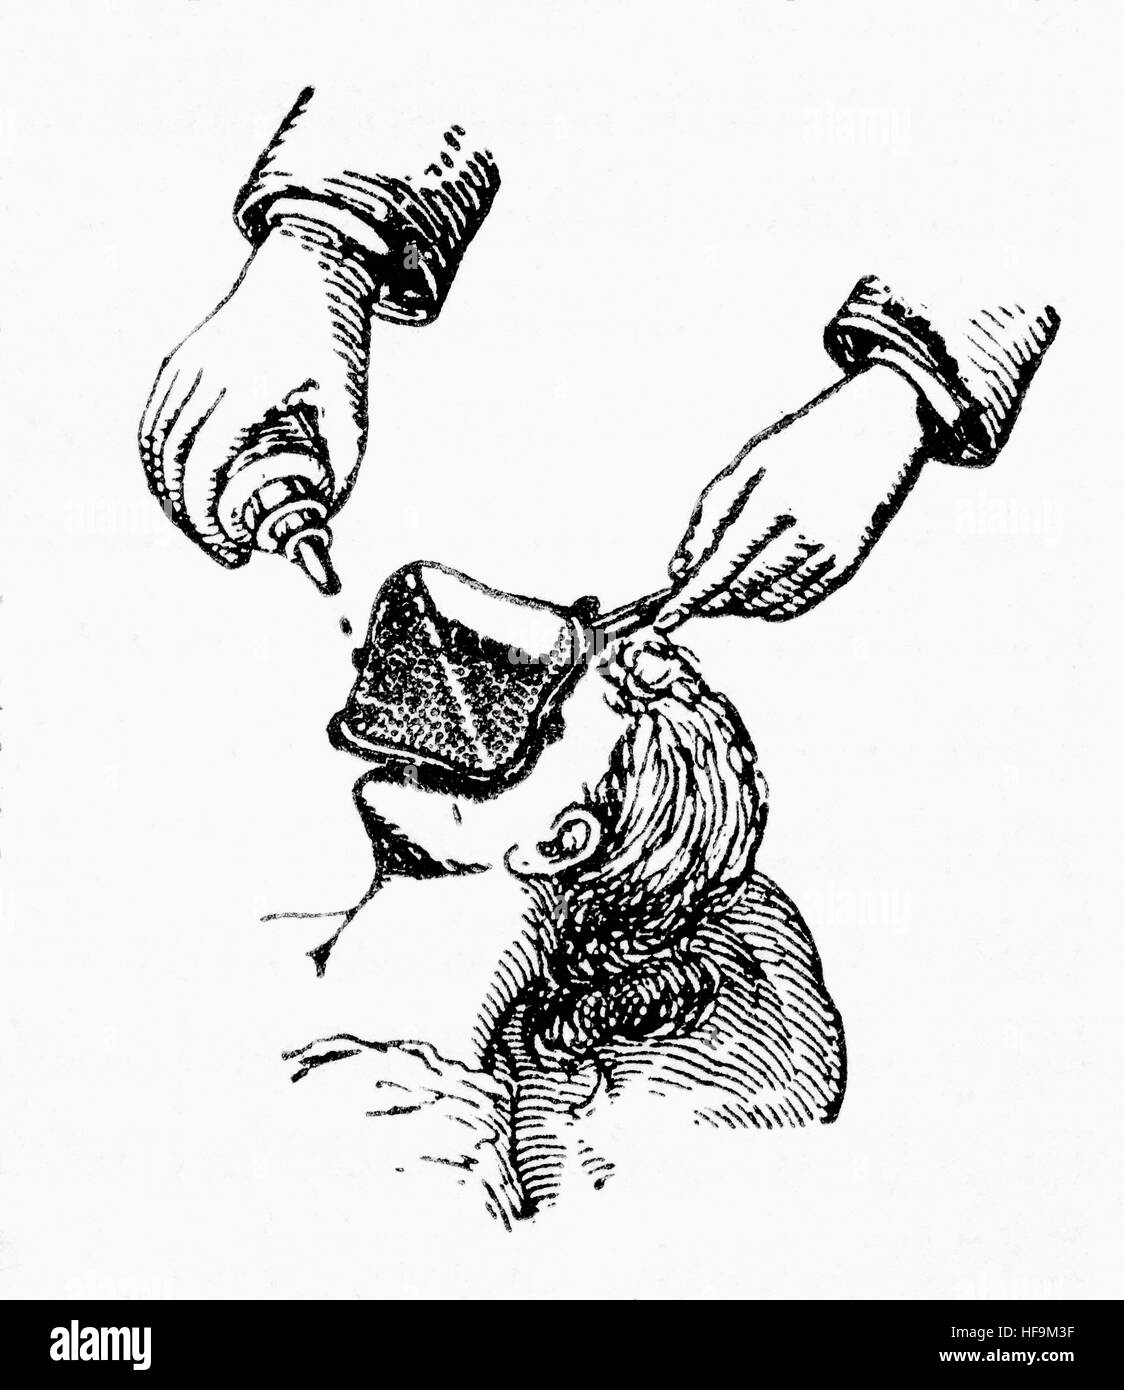 Anaesthetizing a patient in the late 19th century by dripping chloroform onto a mask placed over the face.  From Meyers Lexicon, published 1924. Stock Photo